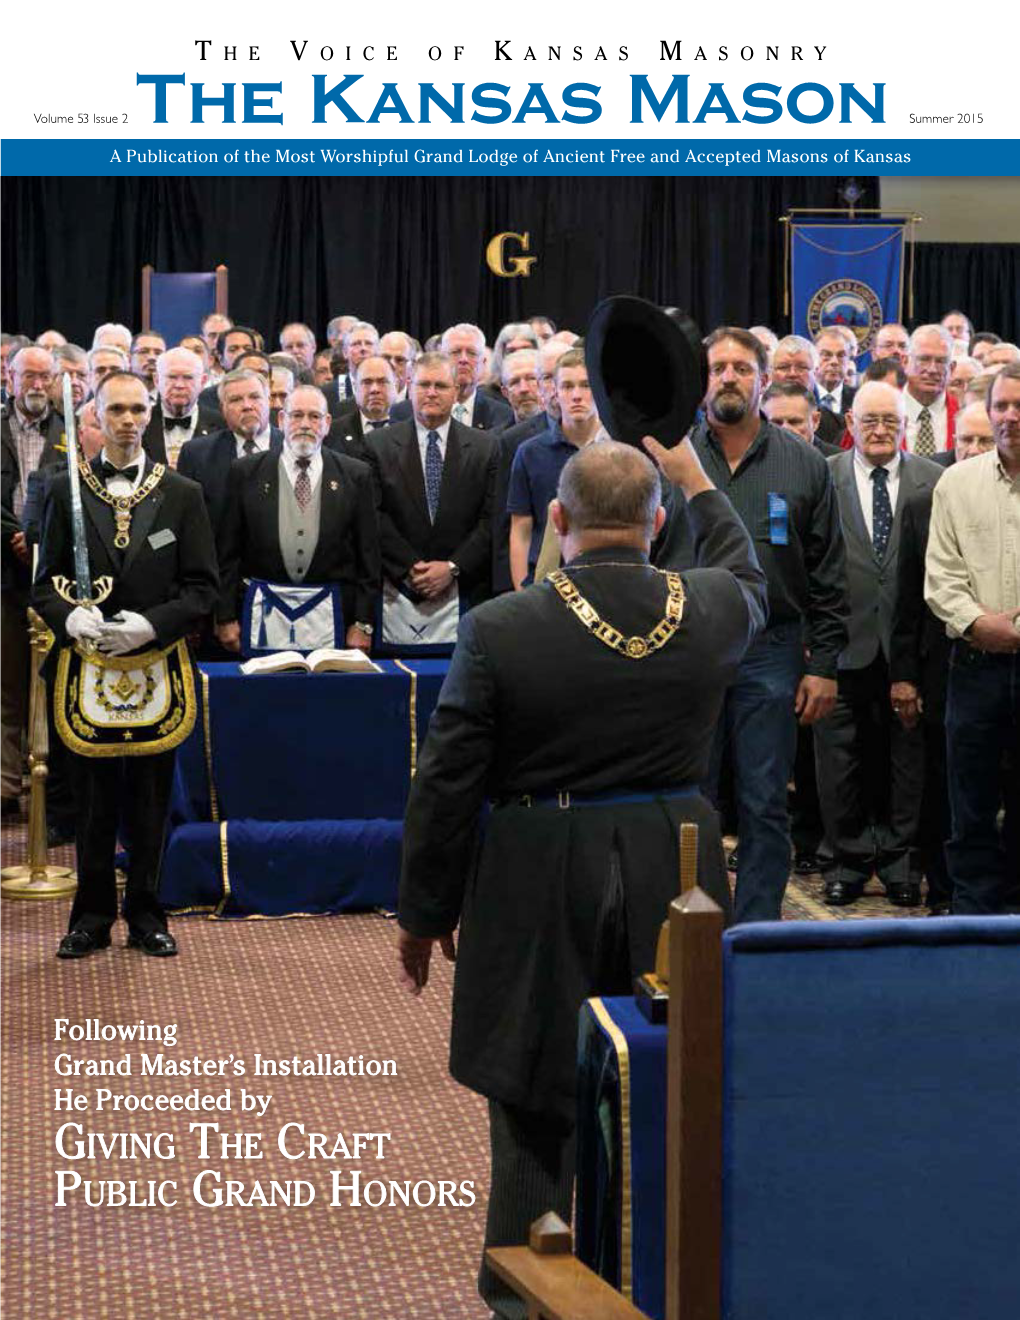 The Kansas Mason Summer 2015 a Publication of the Most Worshipful Grand Lodge of Ancient Free and Accepted Masons of Kansas